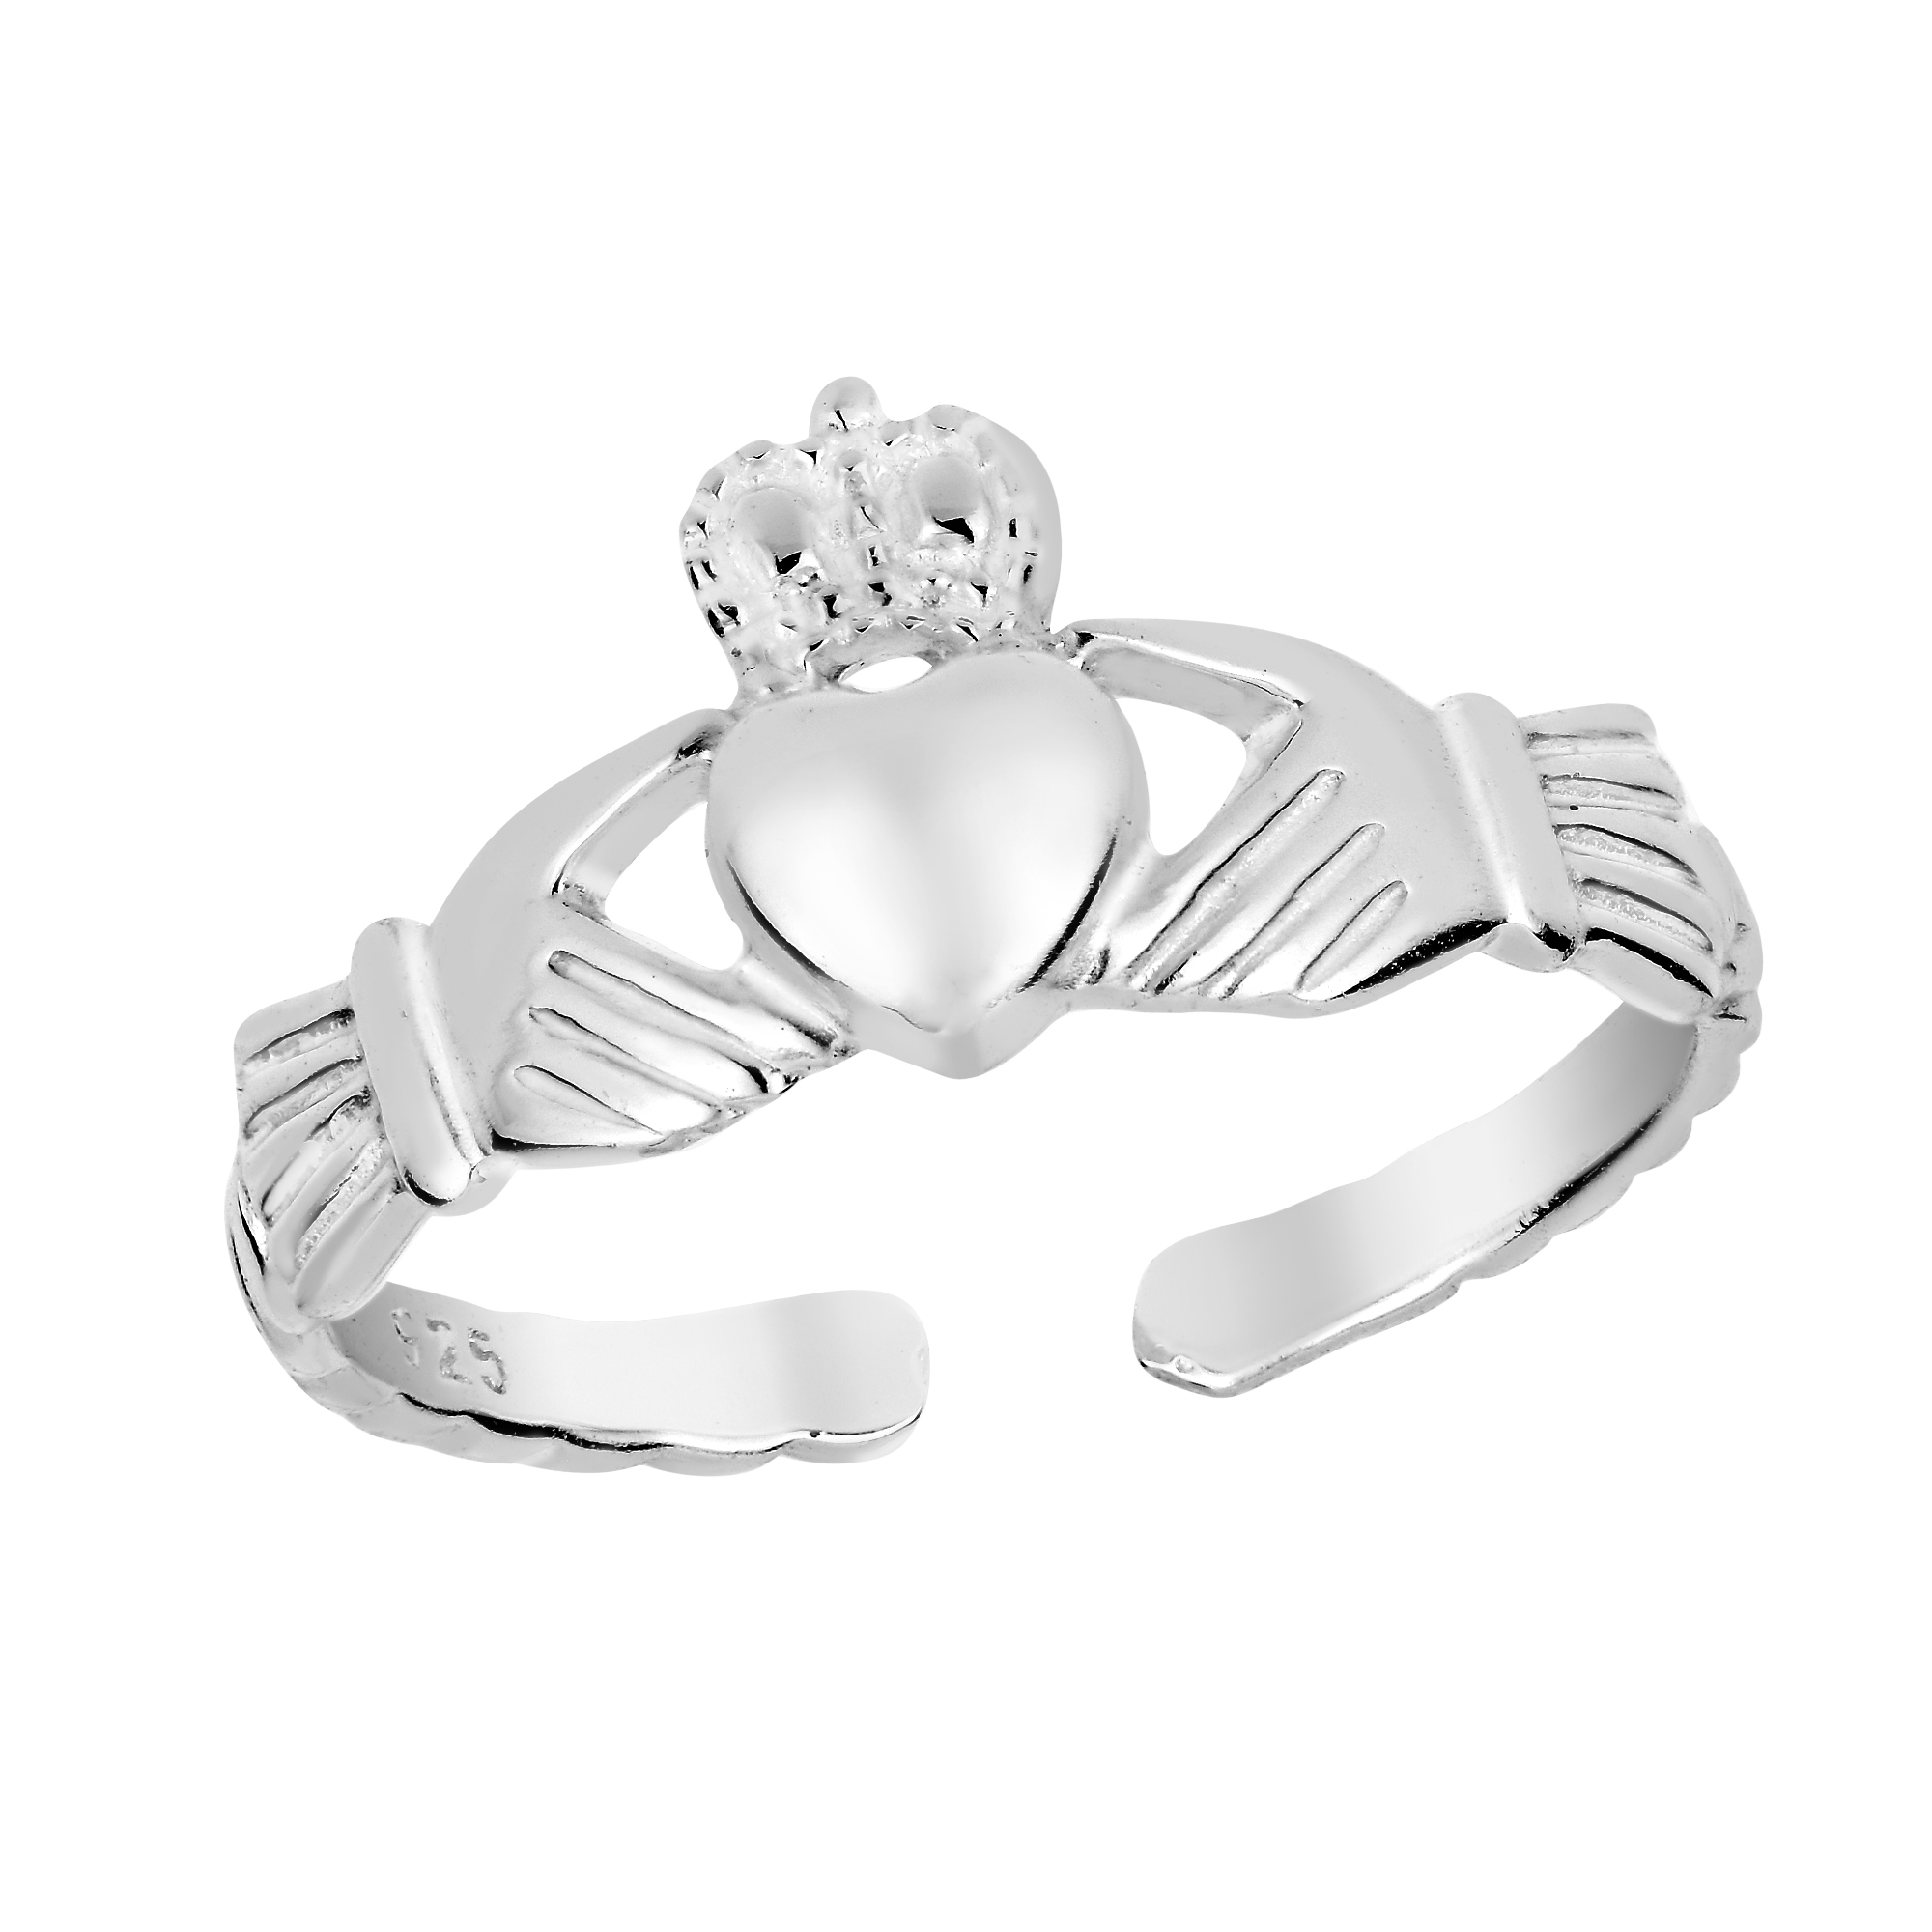 AeraVida Chic Tri Wire Band .925 Sterling Silver Toe Ring or Pinky Ring